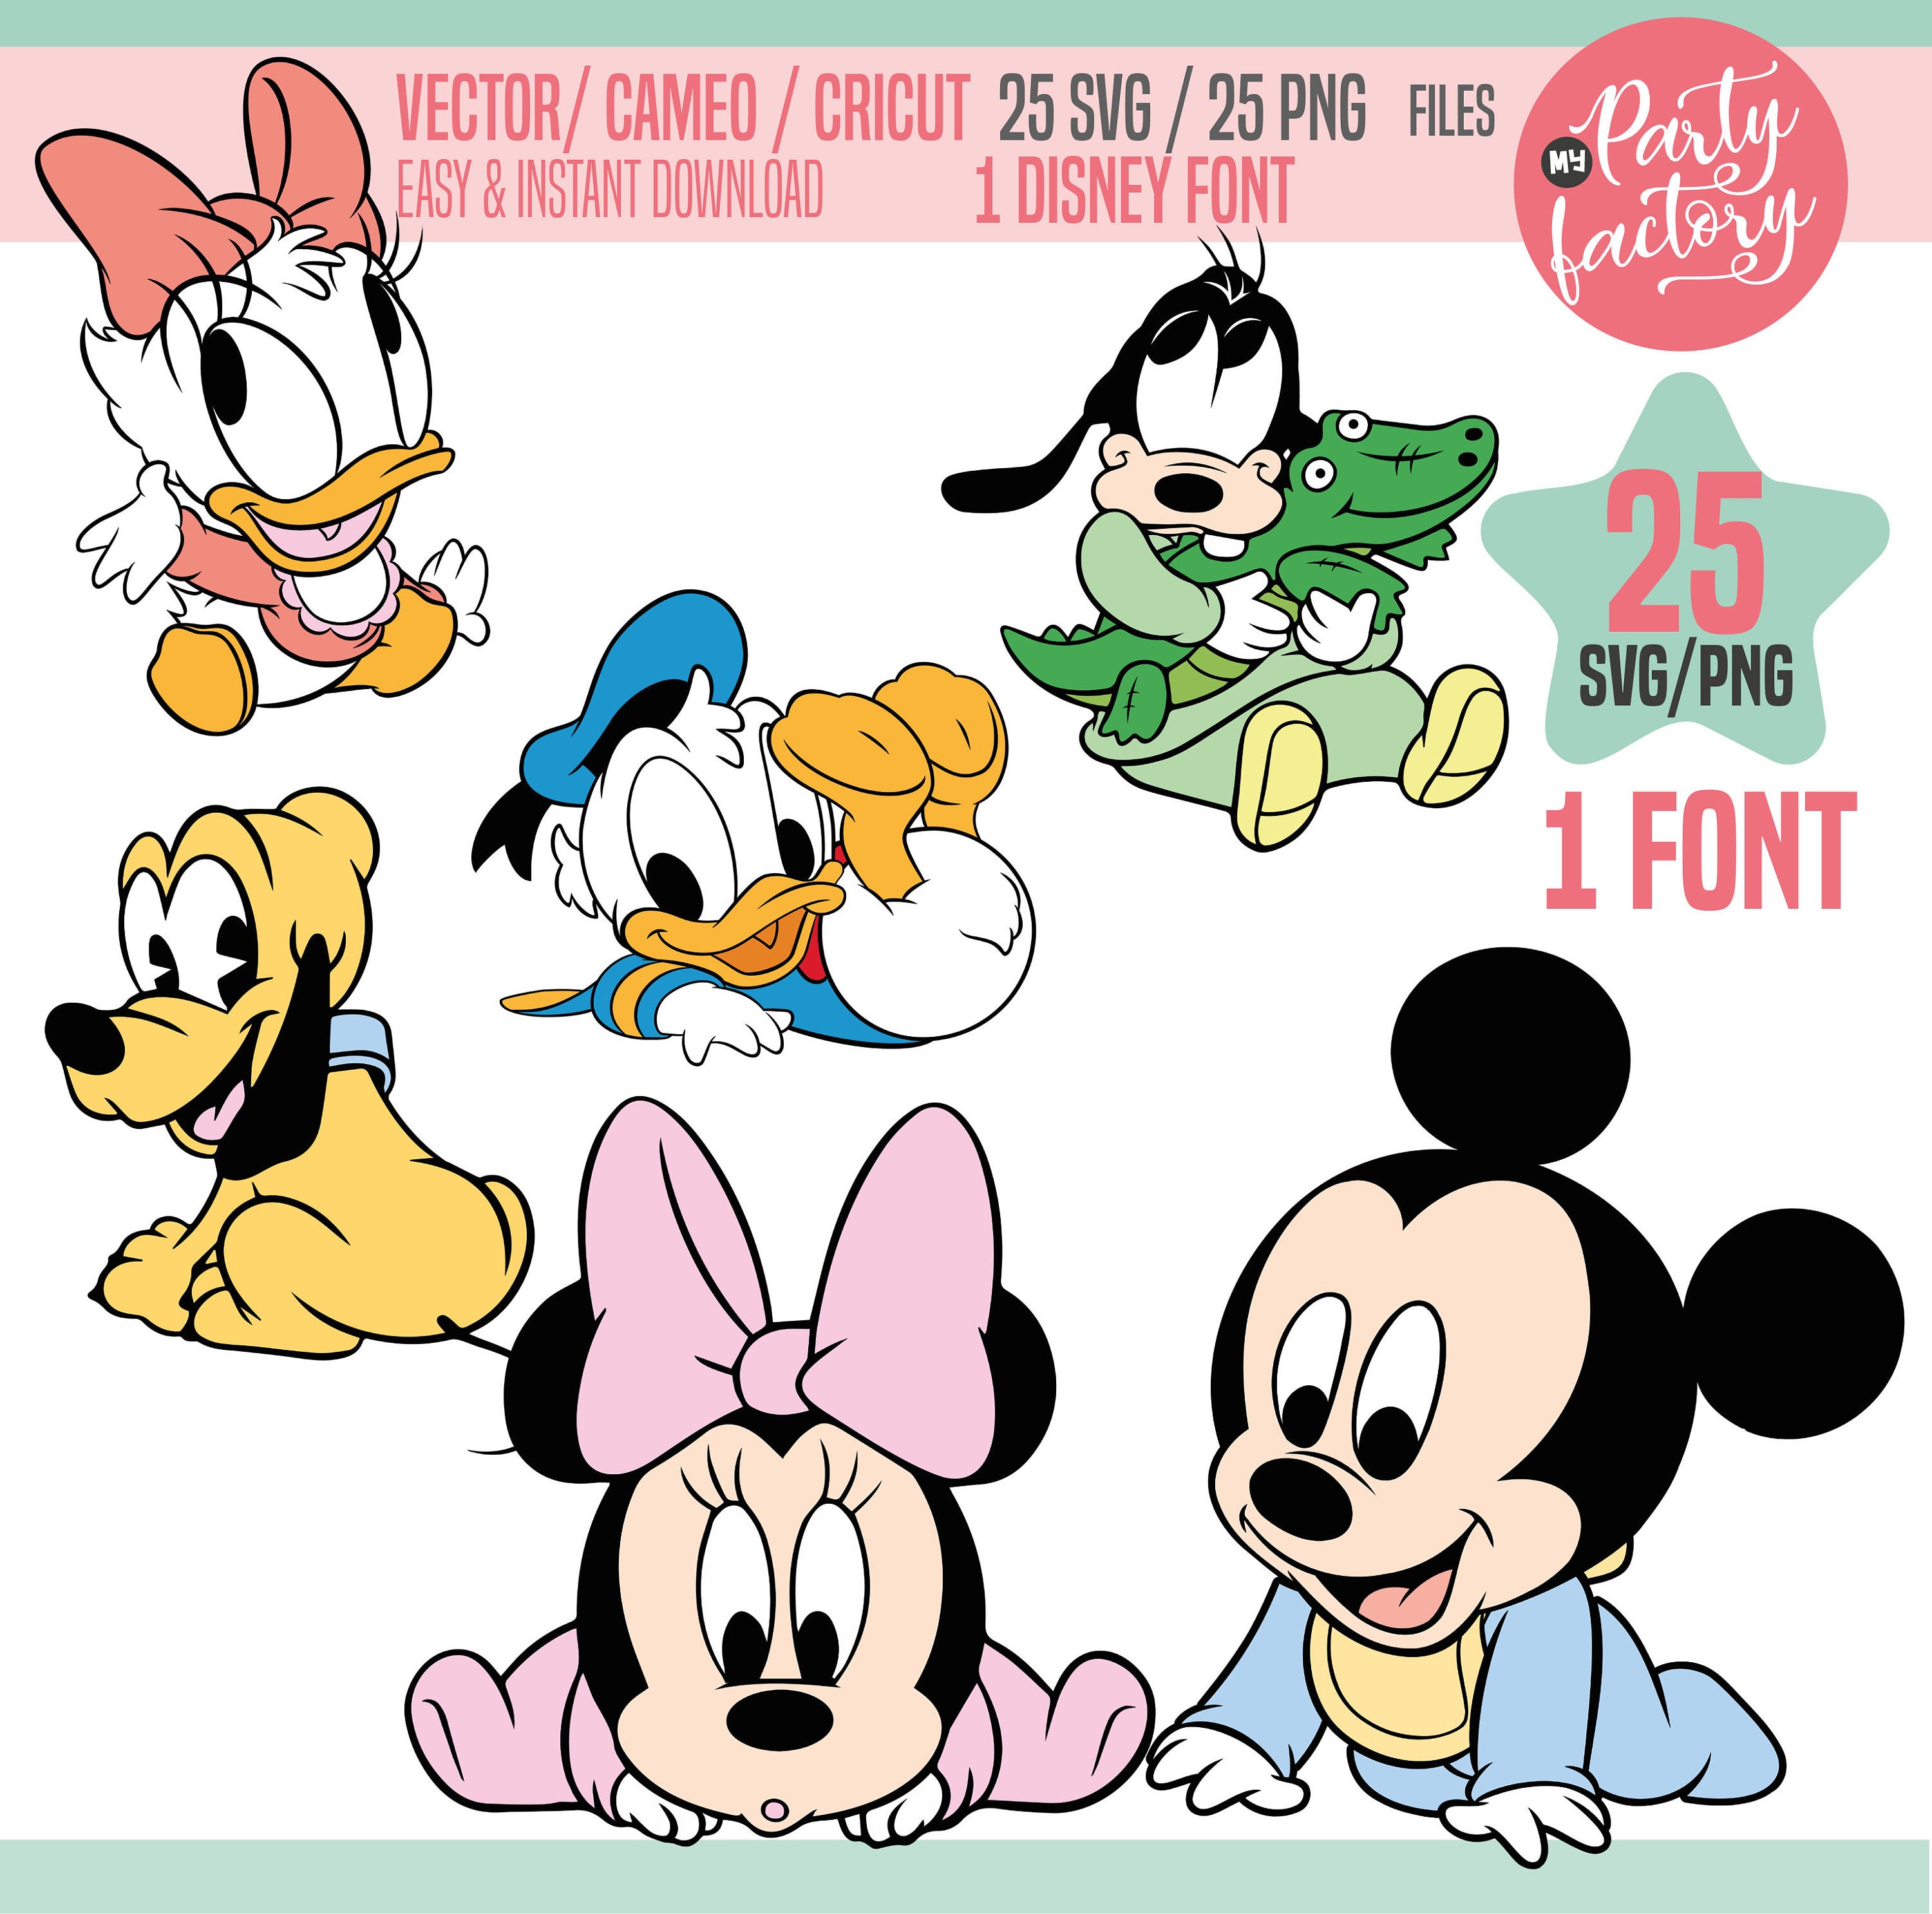 25 Baby Mickey Mouse and Friends SVG Cliparts, Baby Minnie Mouse